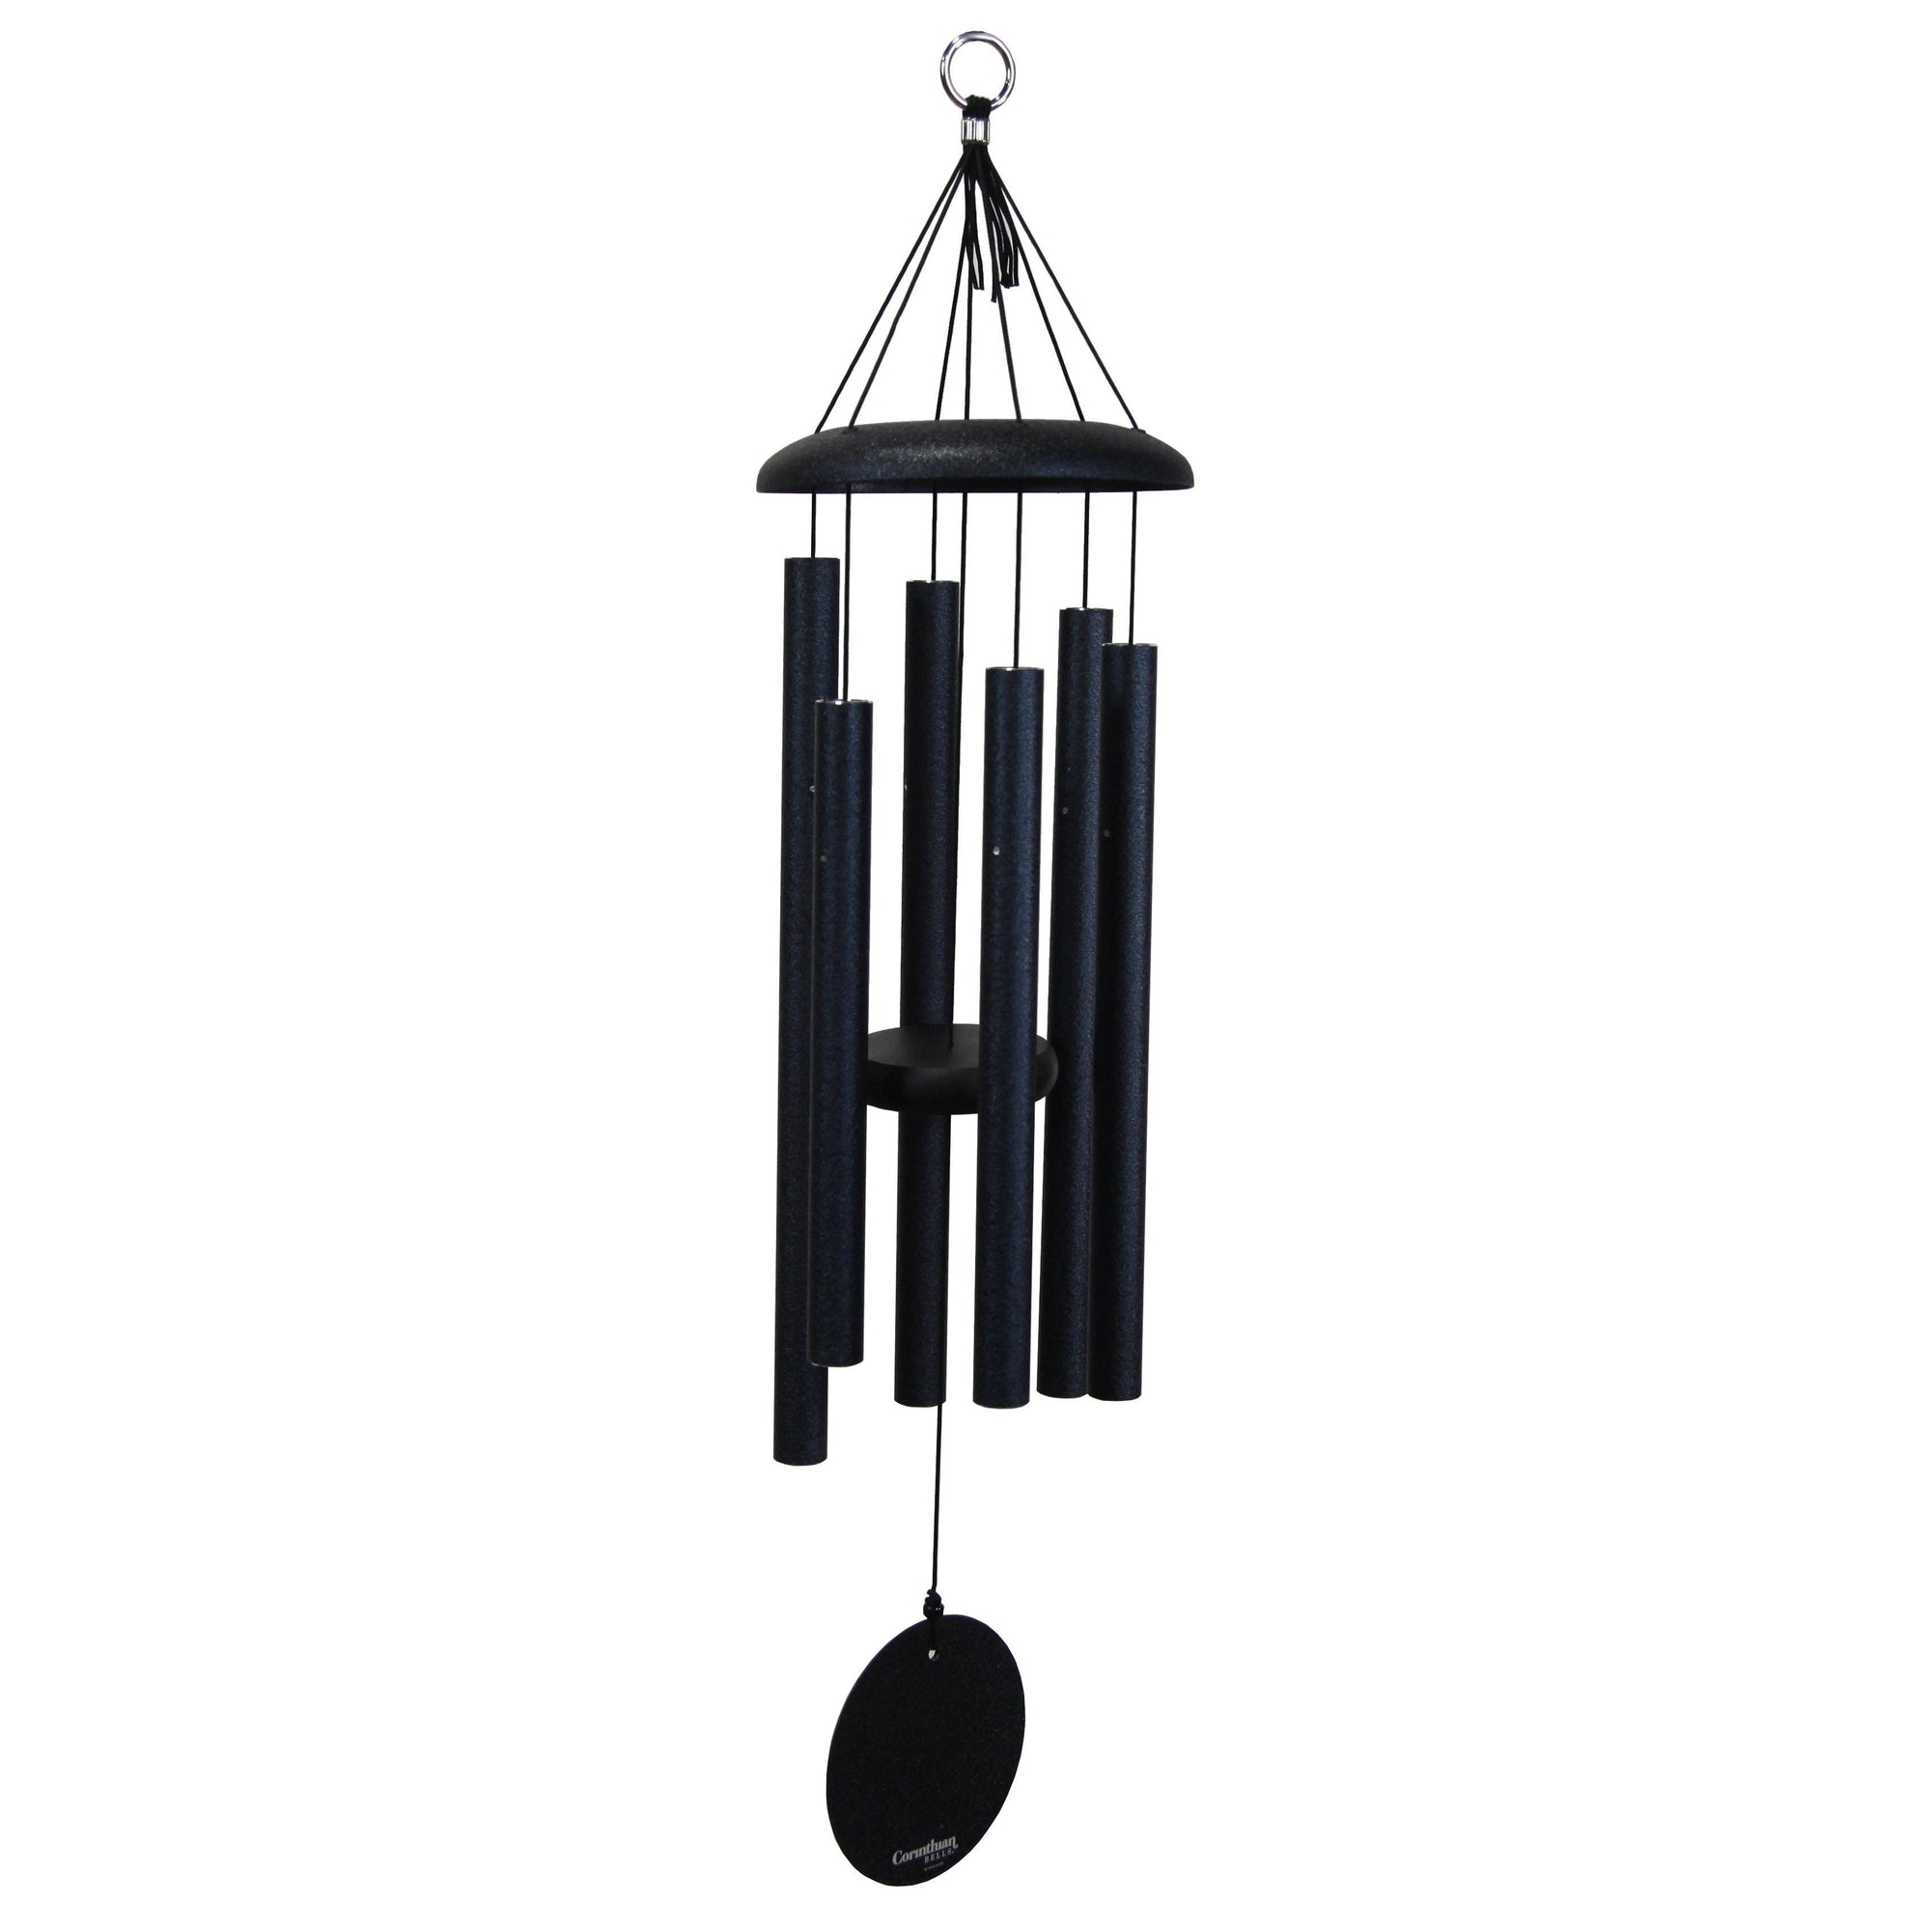 A Corinthian Bells® 30-inch Windchime on a balcony with a white background.